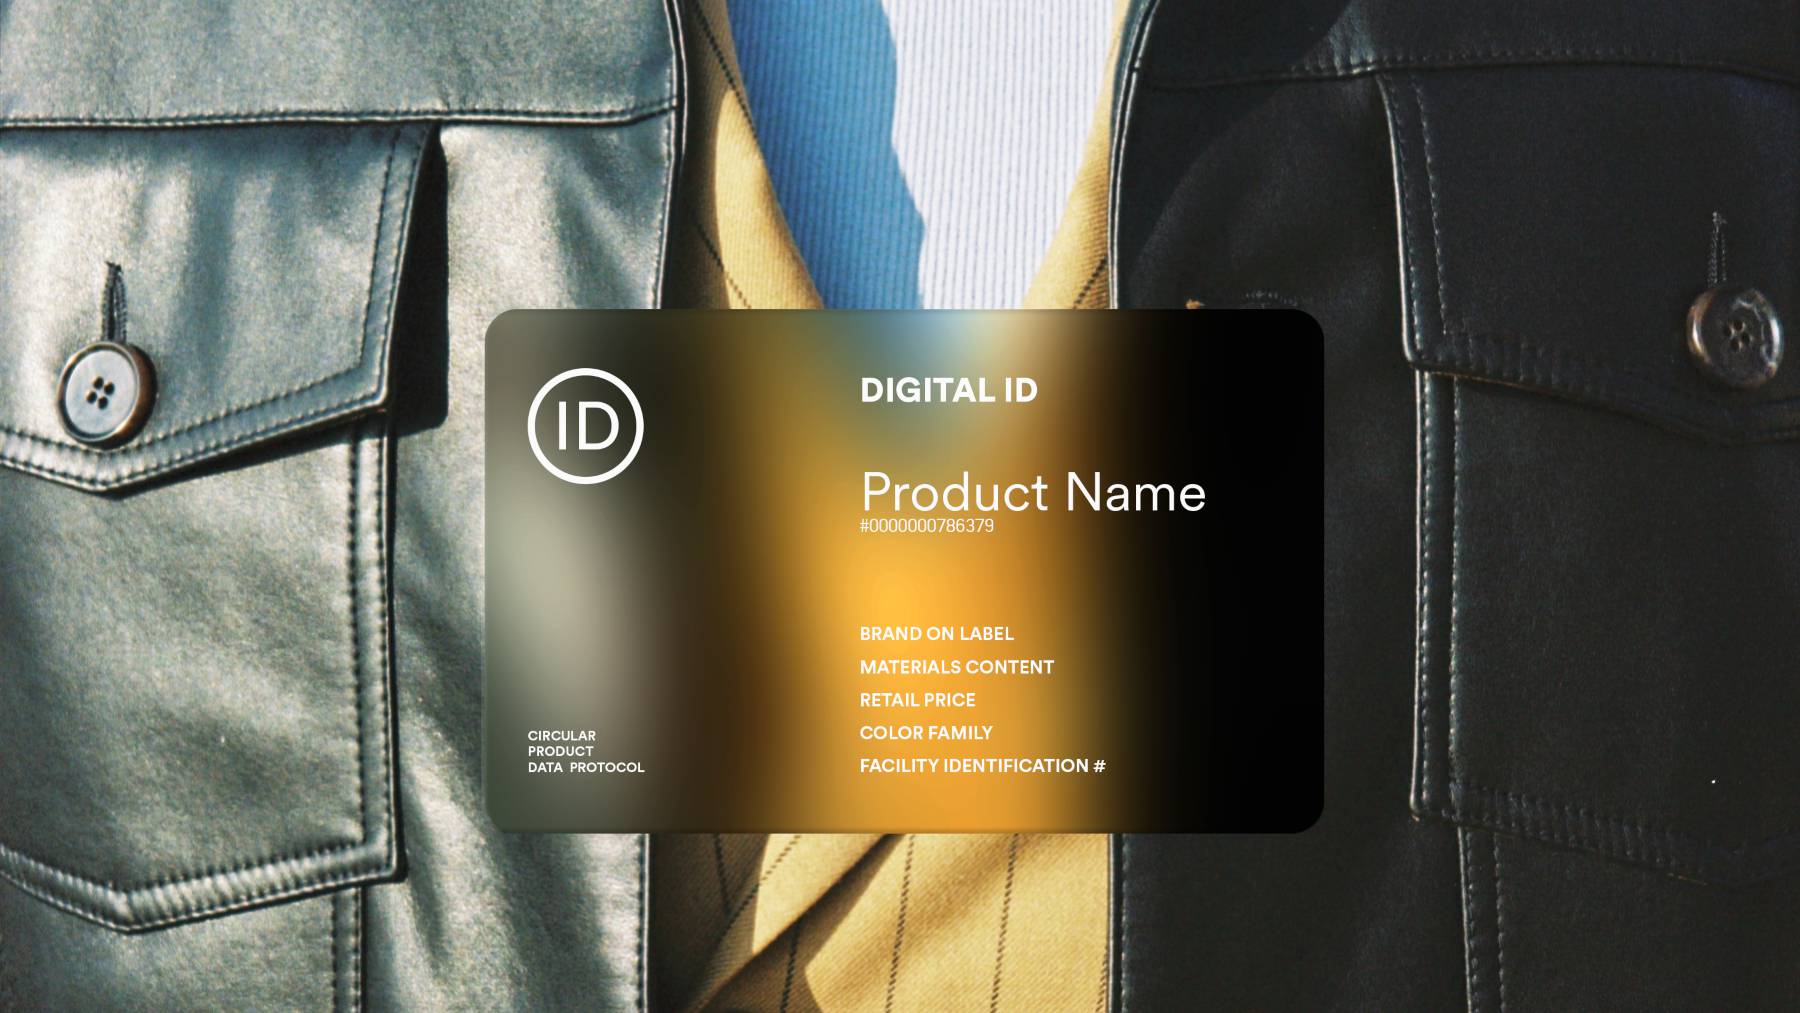 A text box hovering over a shot of a detail shot of a leather jacket over top a shirt has information such as brand on label, materials, retail price and more.